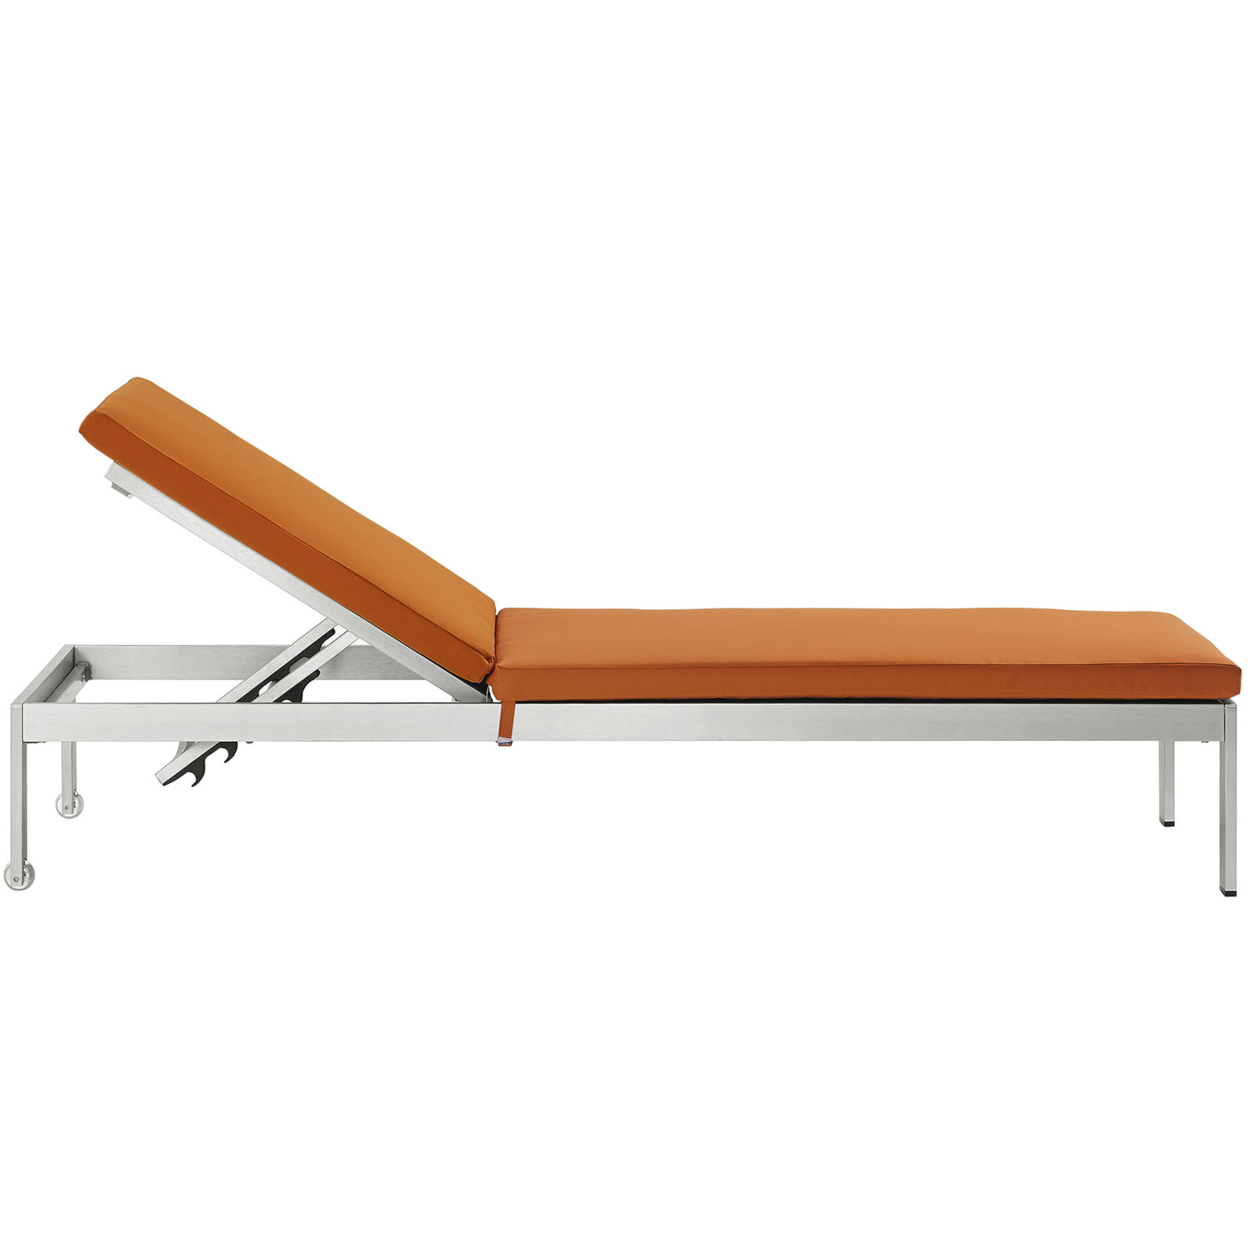 Shore Outdoor Patio Aluminum Chaise With Cushions, Silver Orange